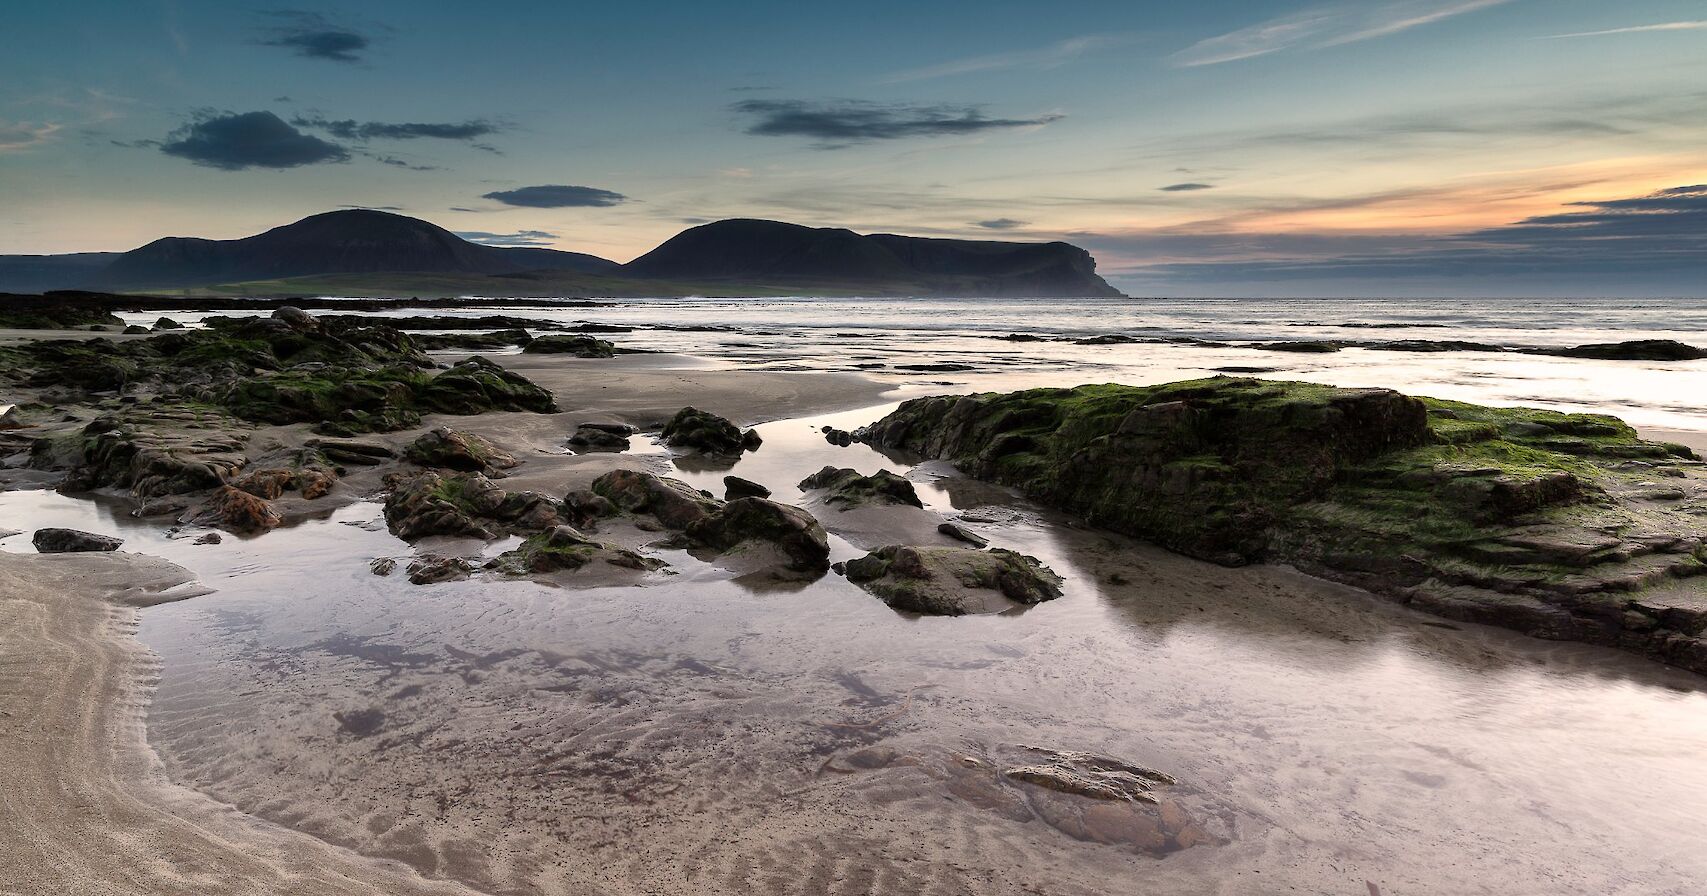 View towards Hoy from Warebeth, Orkney - image by Neil Ford